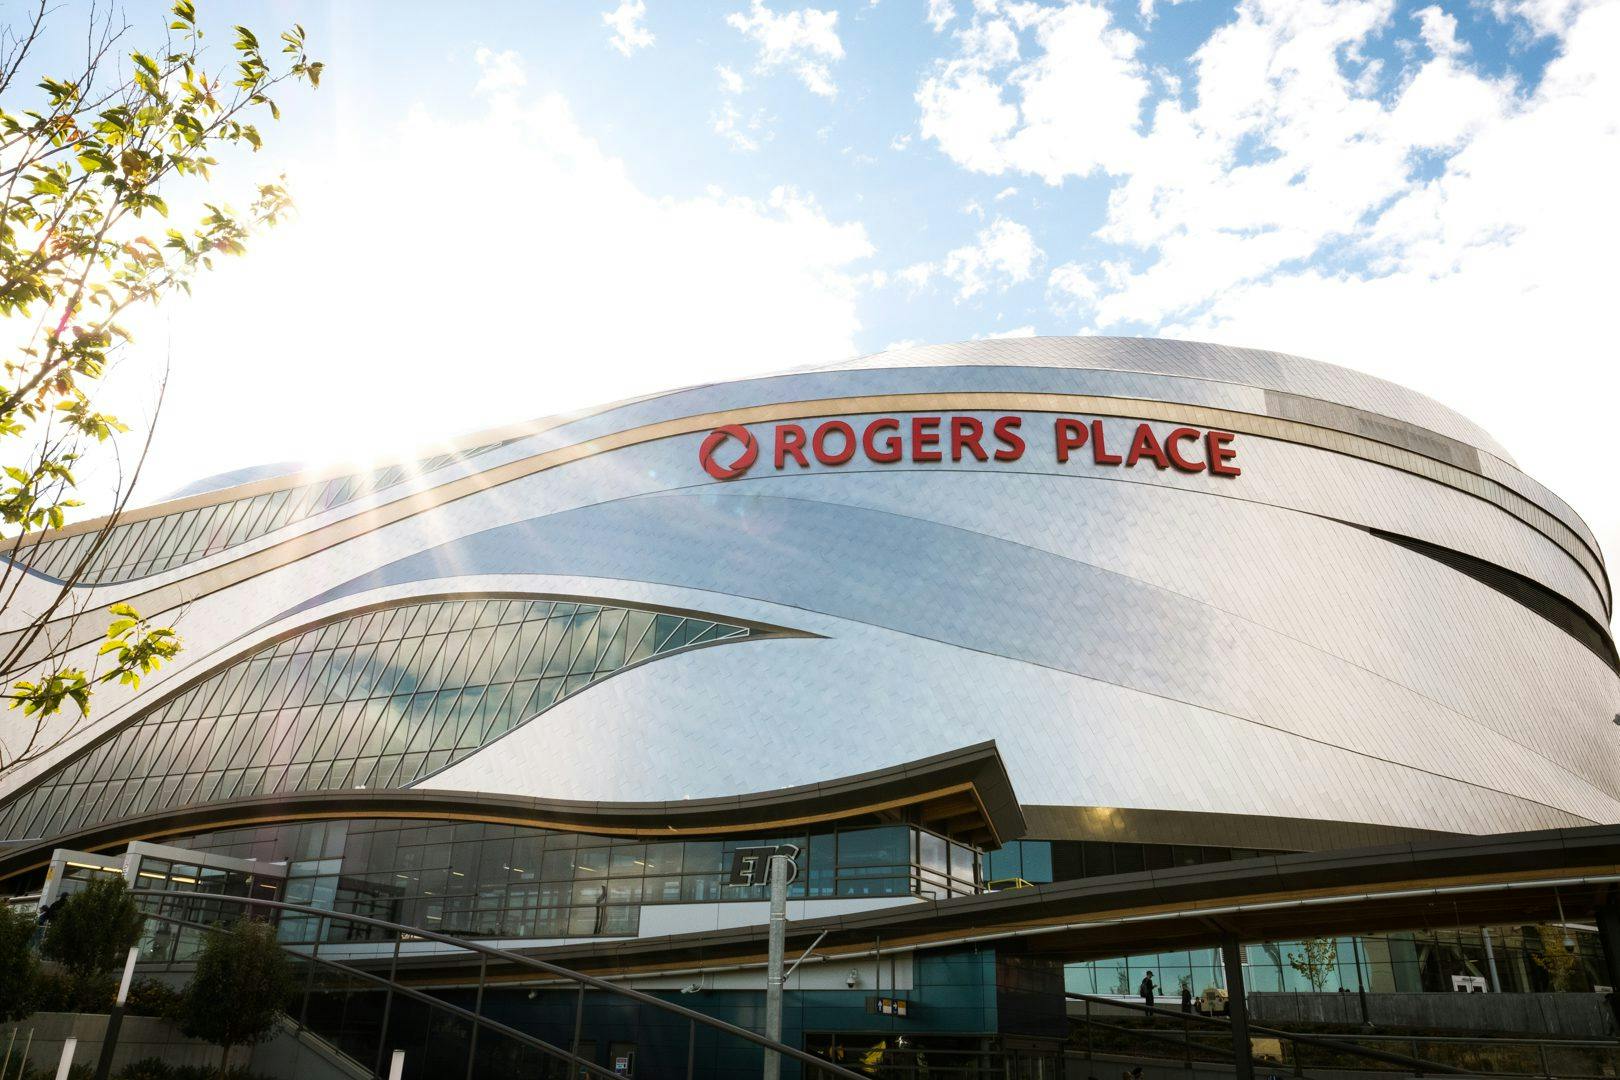 Edmonton will reportedly host the 2022 World Juniors in August